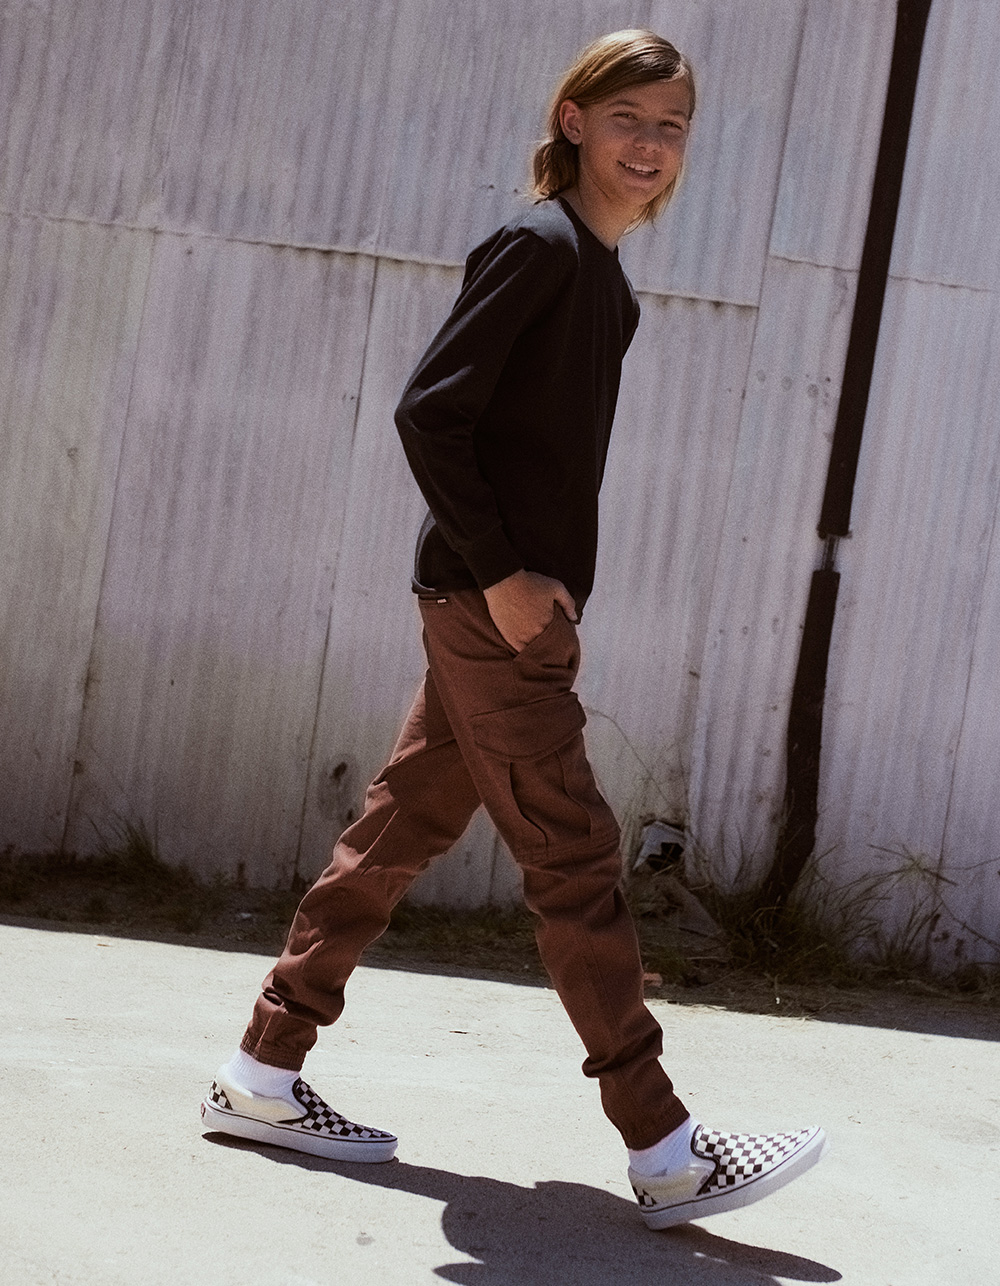 RSQ Boys Twill Cargo Jogger Pants - BROWN | Tillys